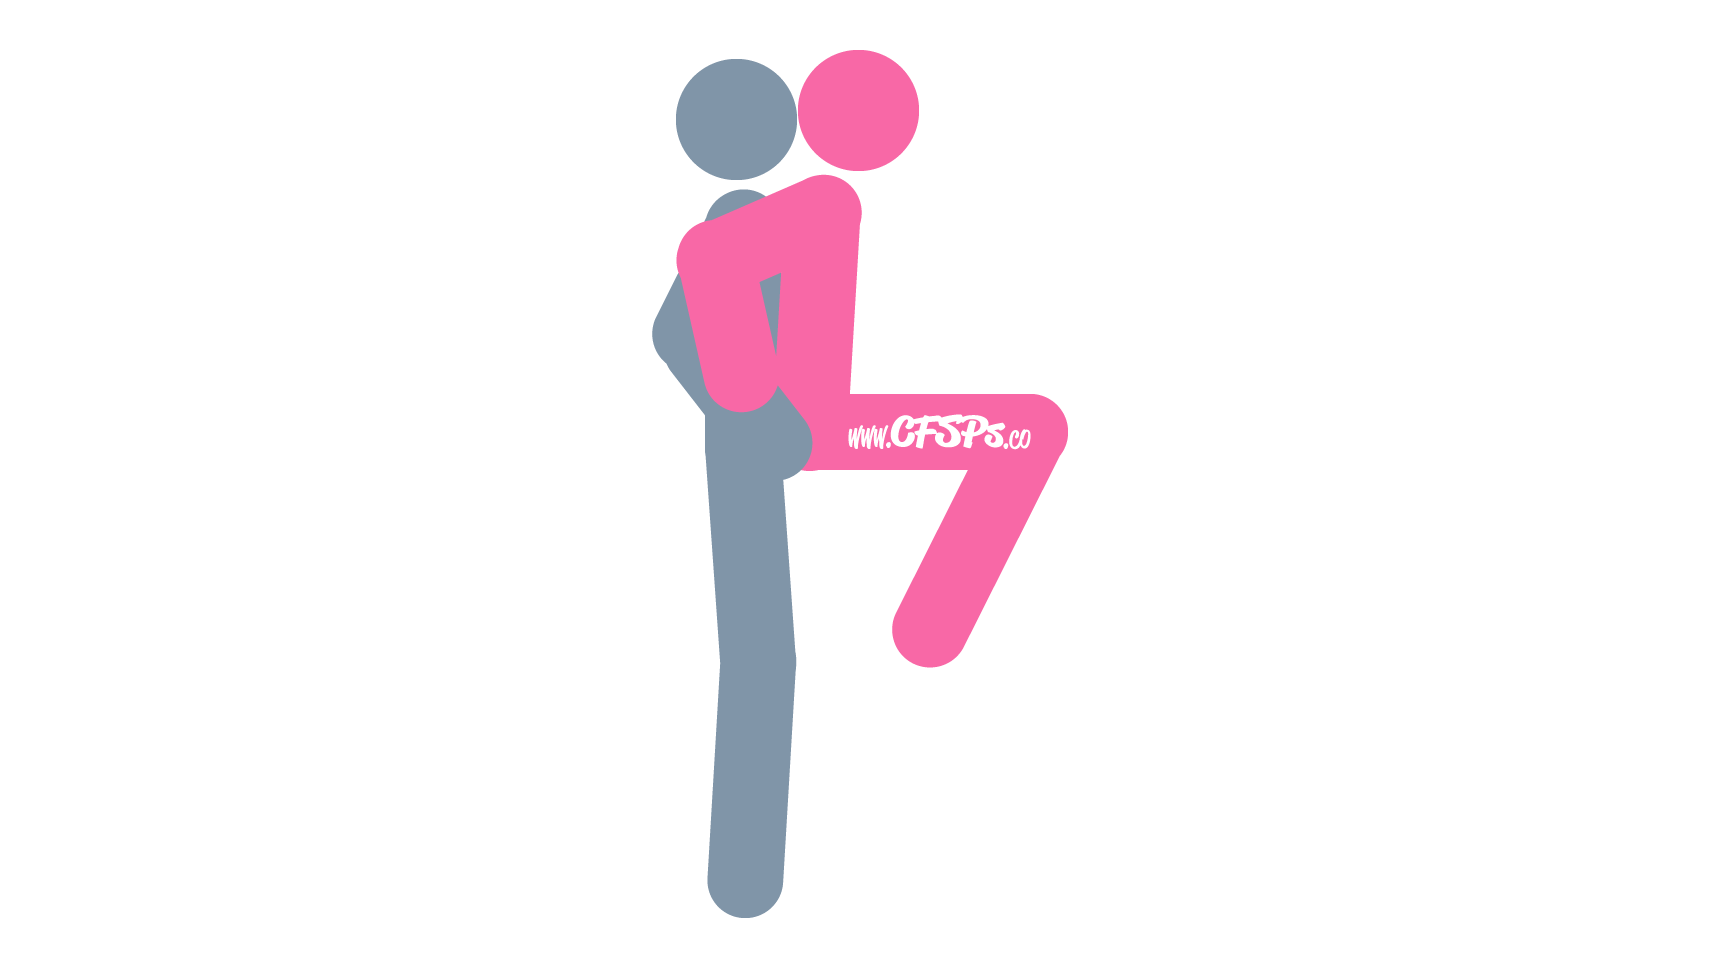 What is the Squat Balance sex position? 